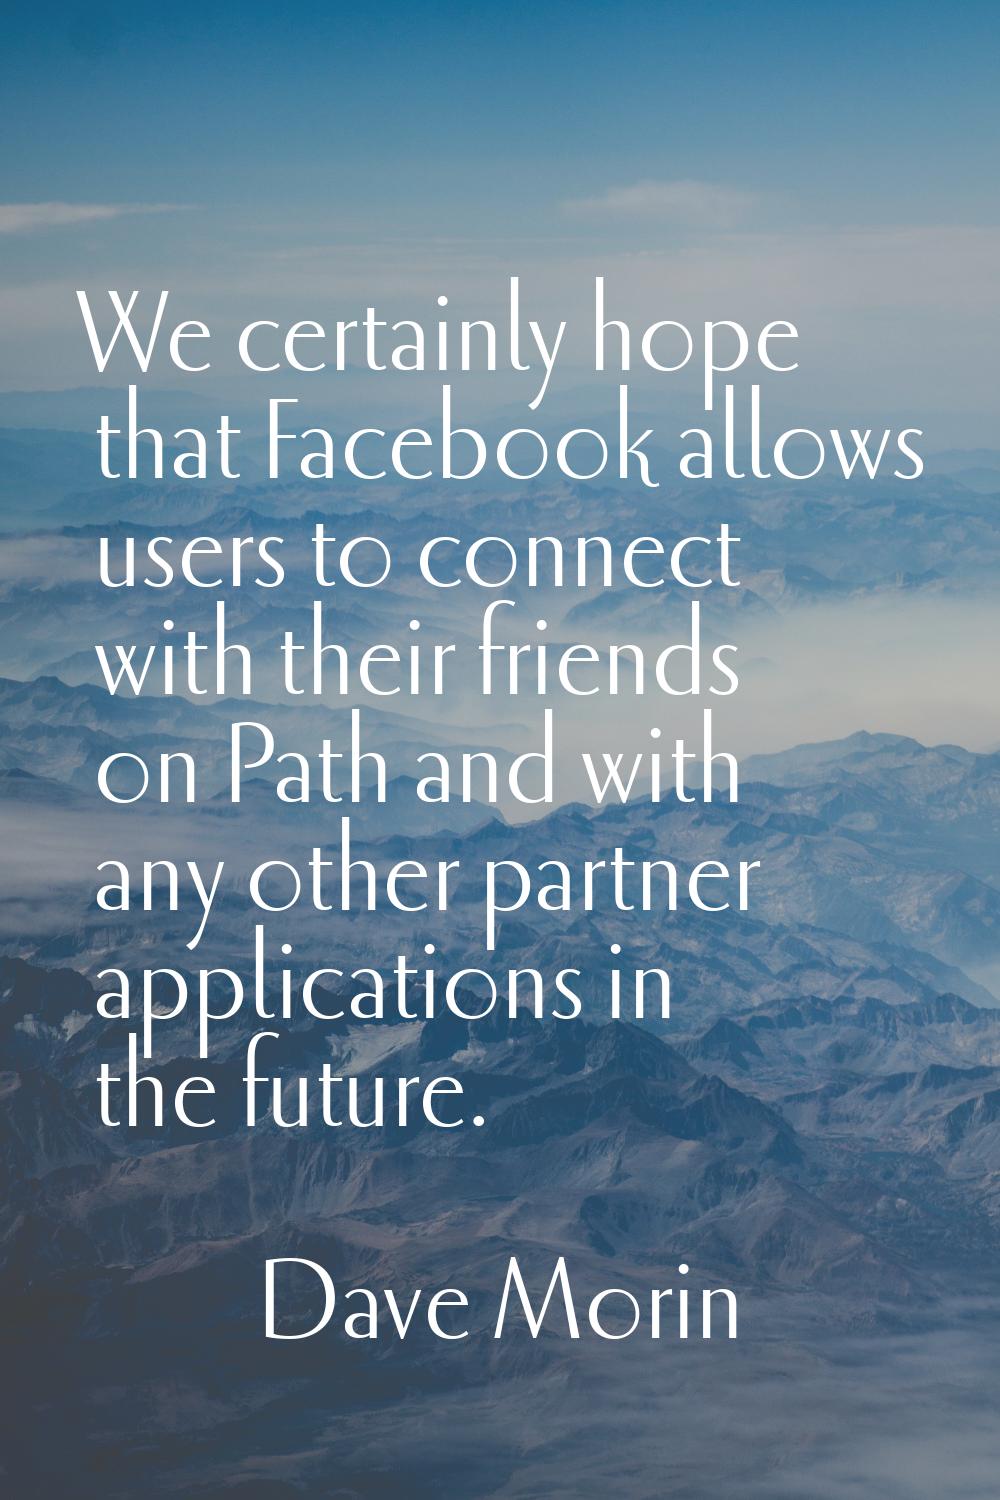 We certainly hope that Facebook allows users to connect with their friends on Path and with any oth